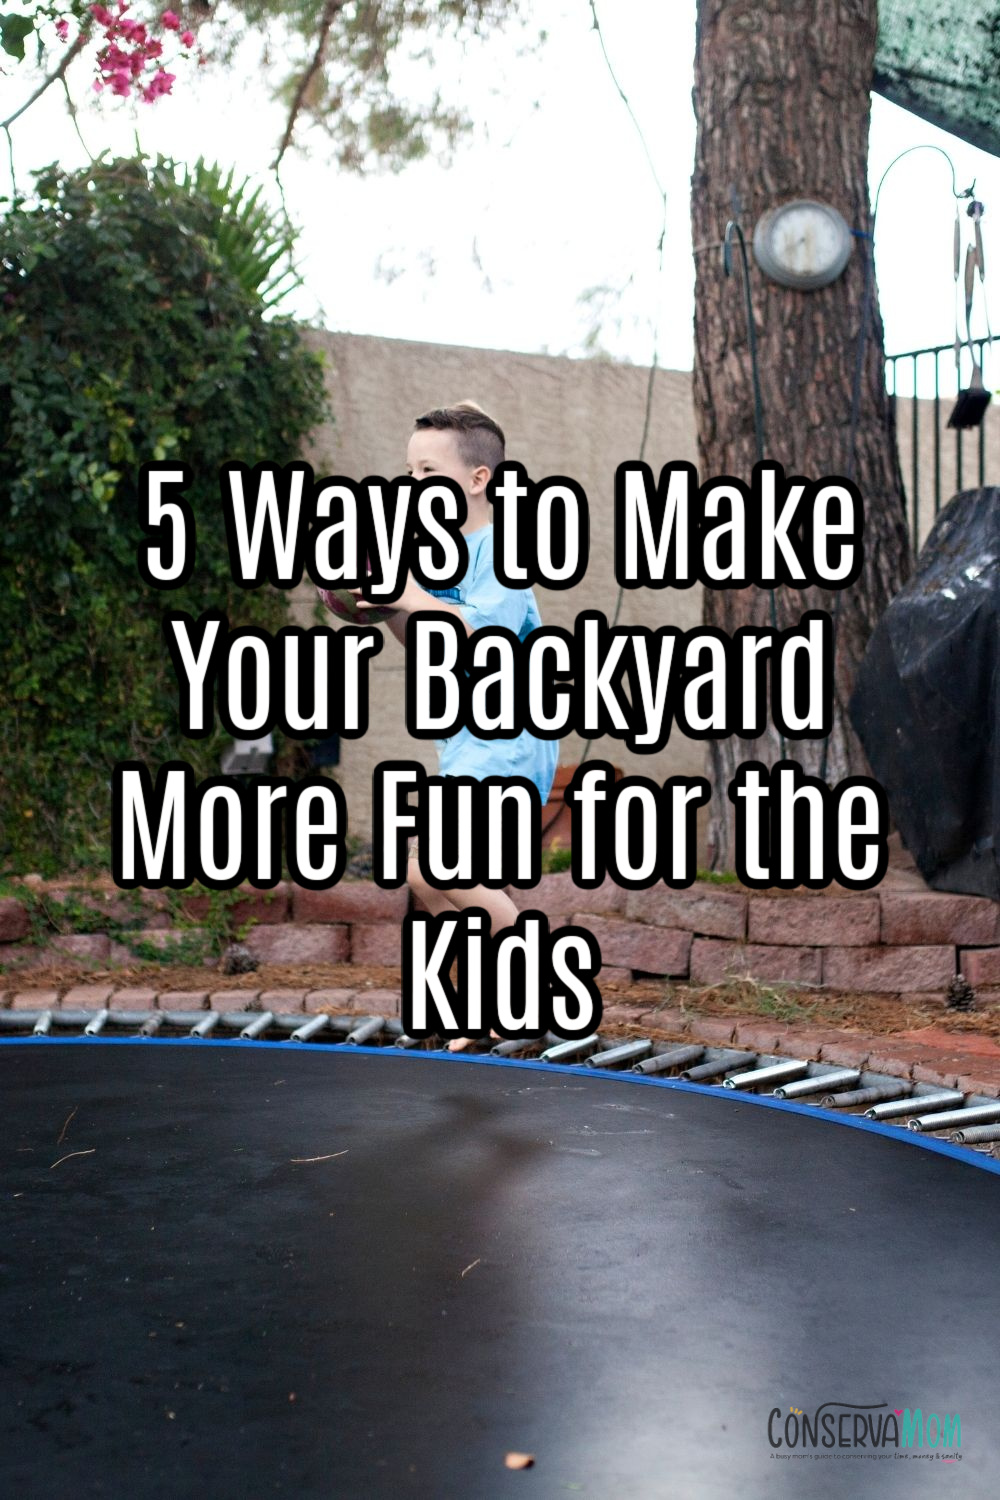 5 Ways to Make Your Backyard More Fun for the Kids 